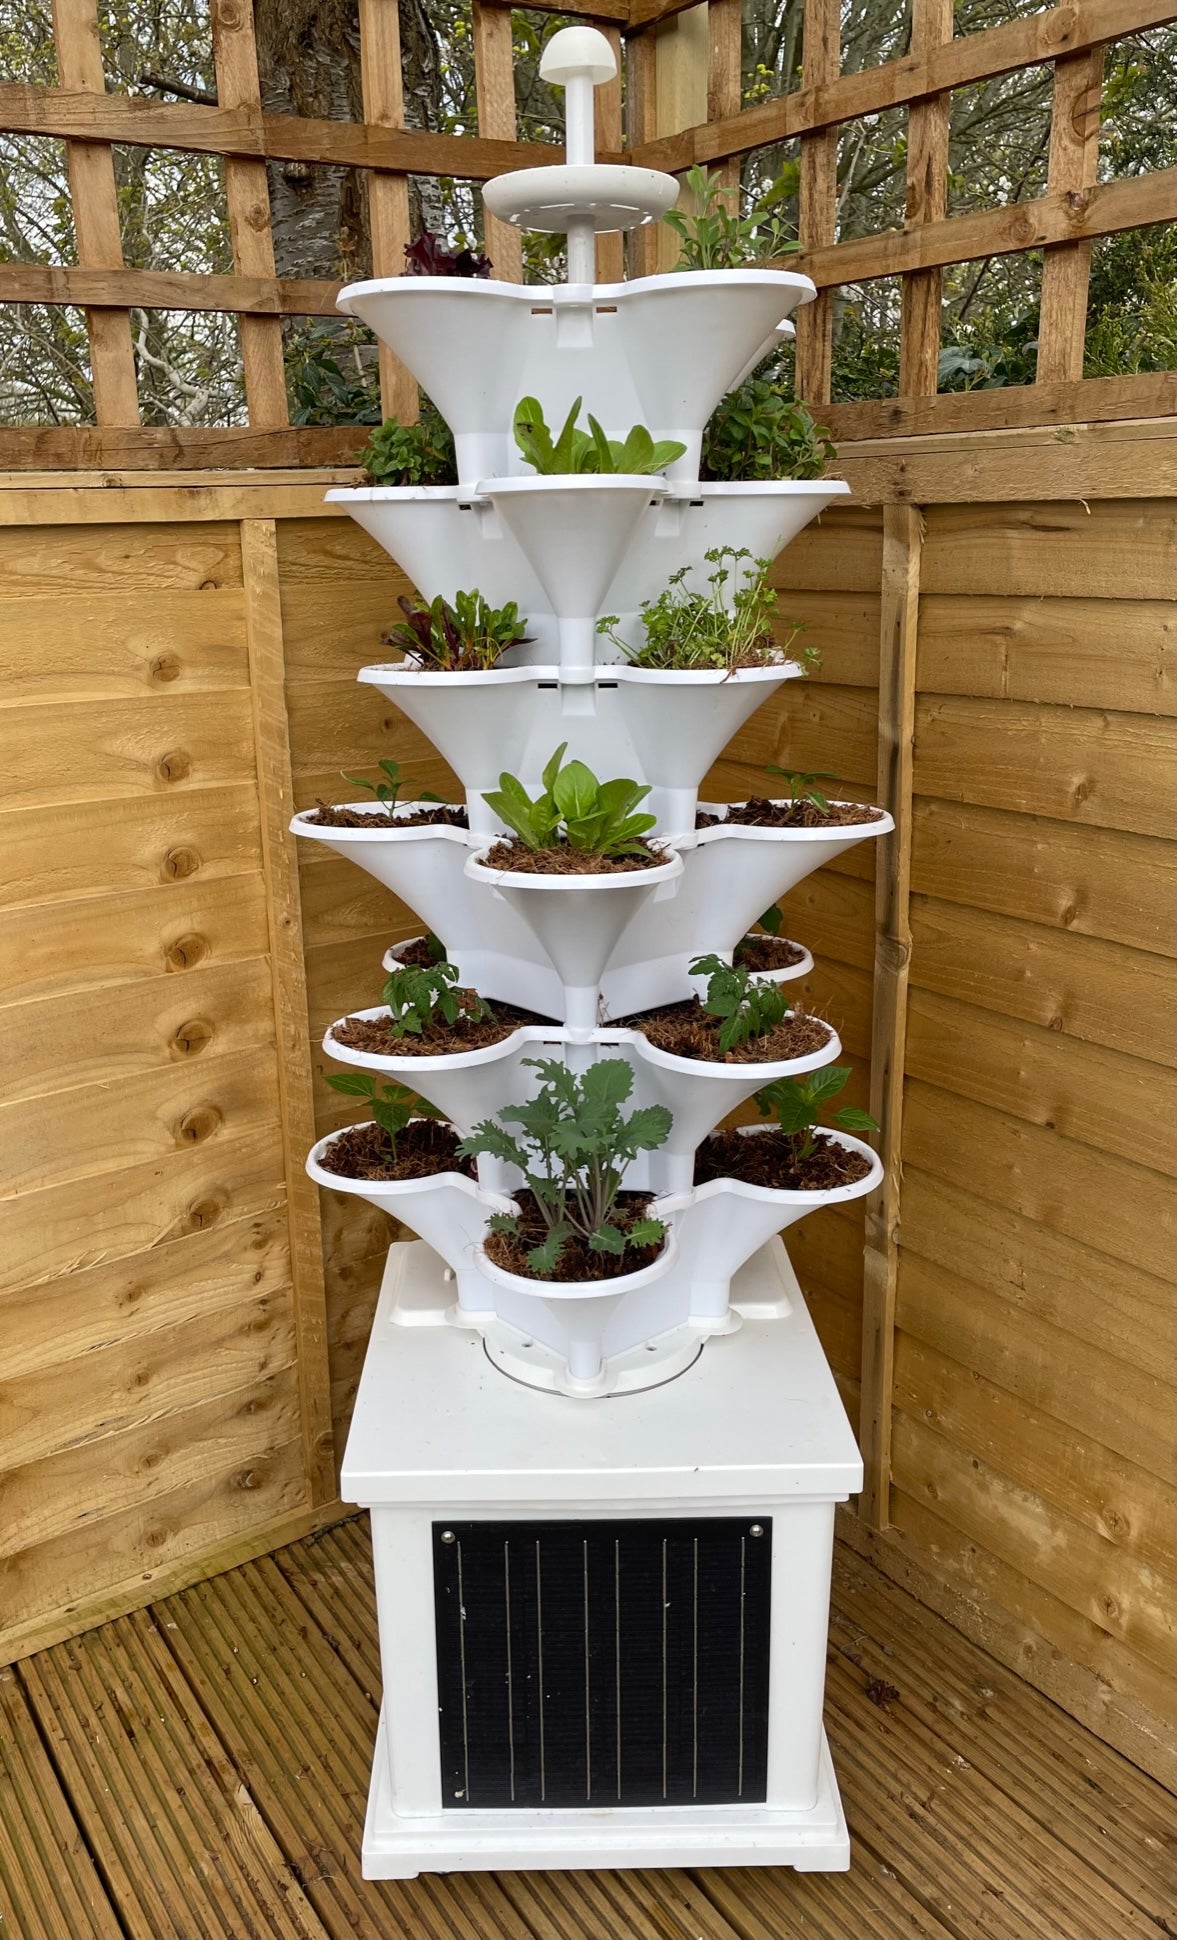 Acqua Garden 2 - Automated Solar Powered Self-Watering Vertical Growing System - 'Garden in a Box'